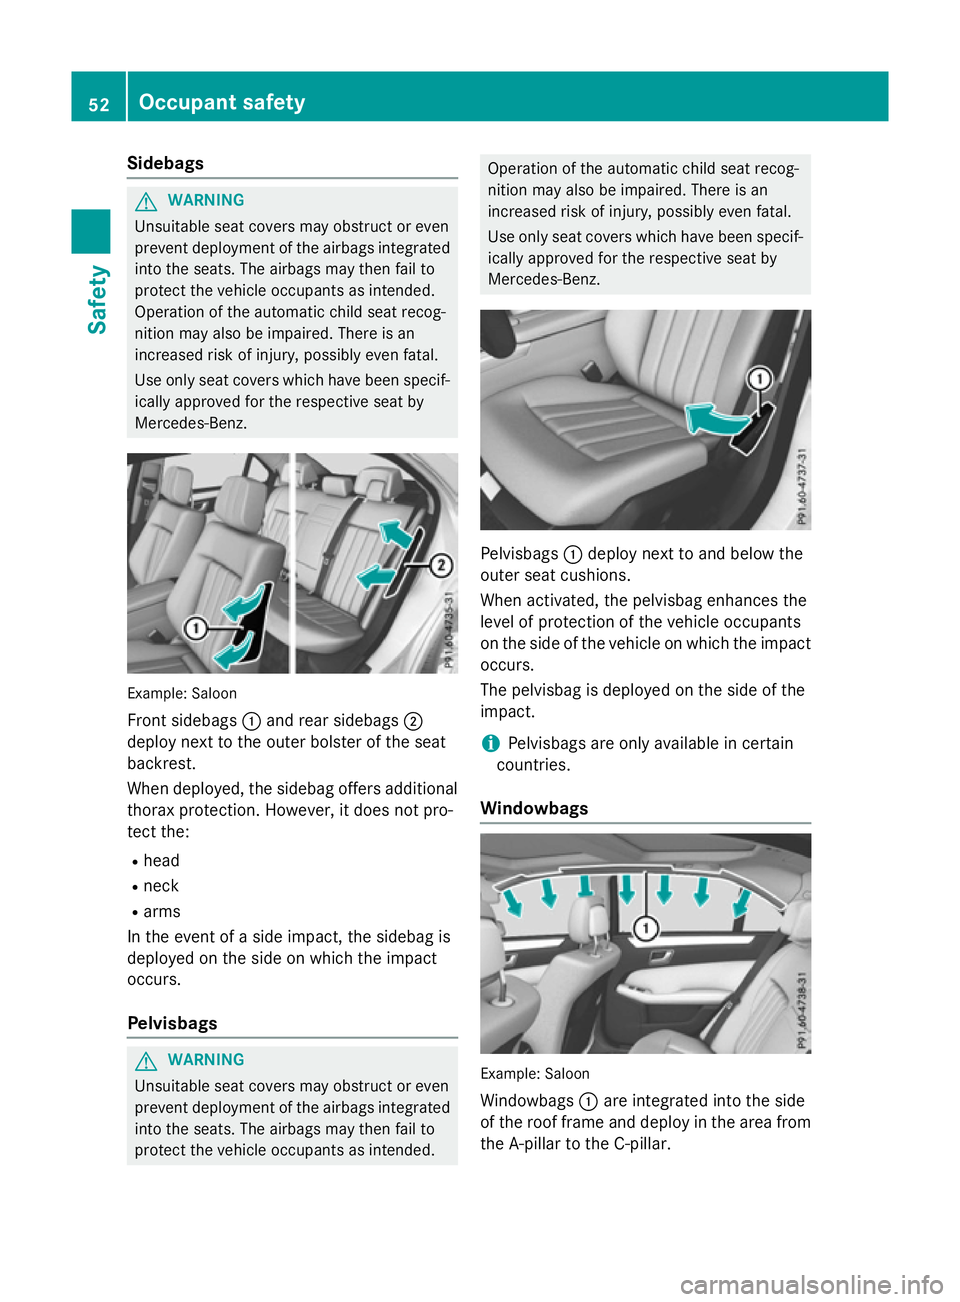 MERCEDES-BENZ E-CLASS SALOON 2015  Owners Manual Sidebags
G
WARNING
Unsuitable seat covers may obstruct or even
prevent deployment of the airbags integrated into the seats. The airbags may then fail to
protect the vehicle occupants as intended.
Oper